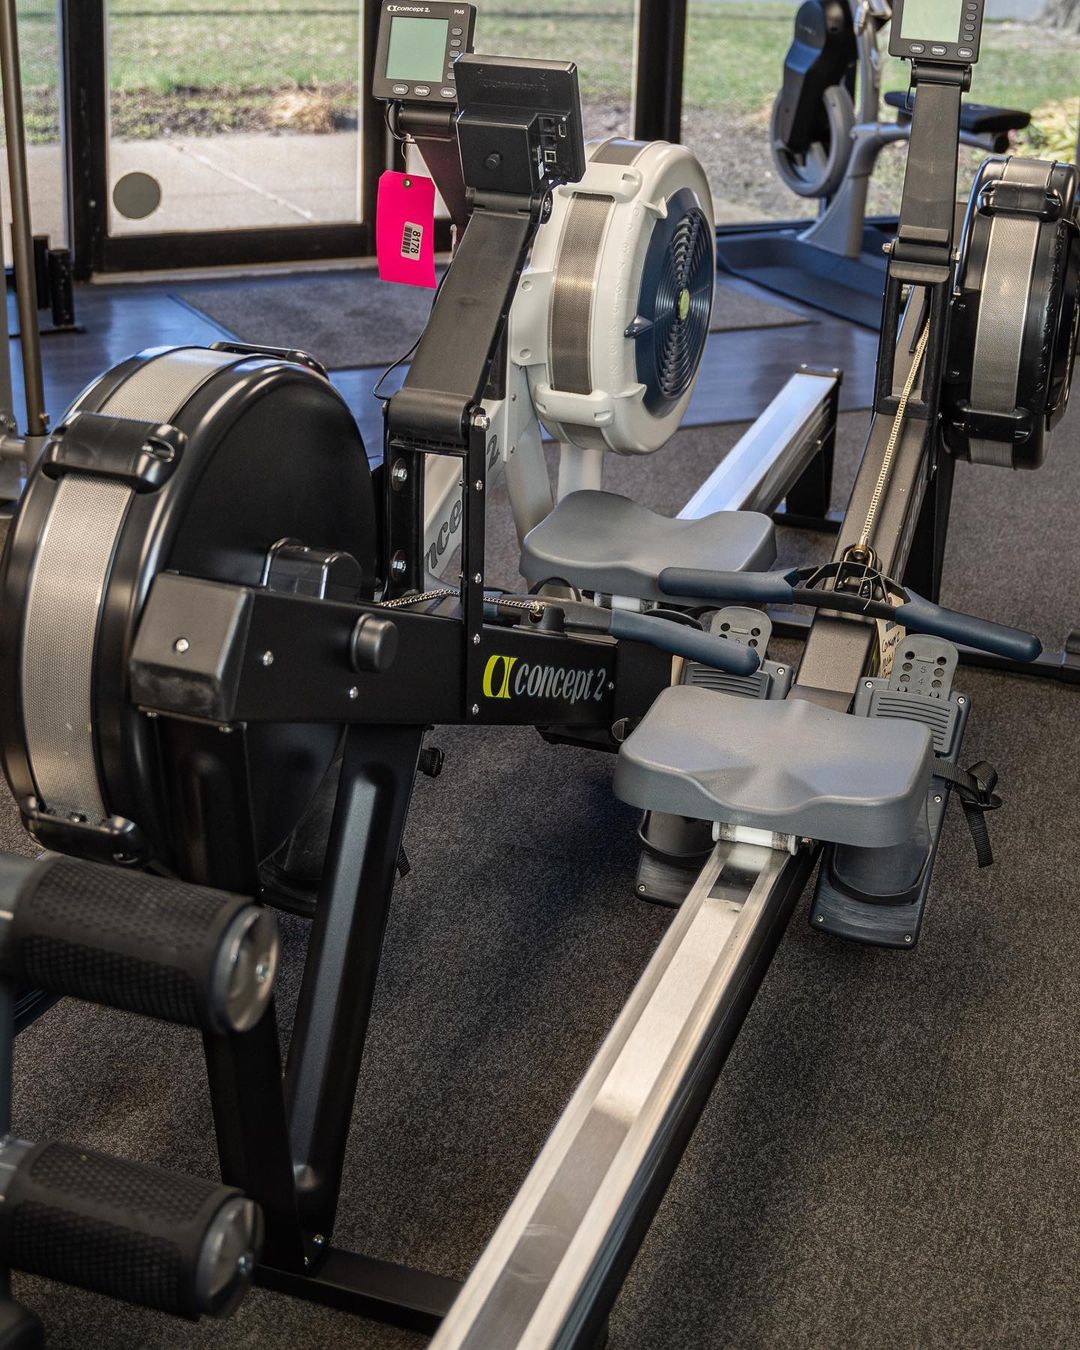 The Concept2 rower Model D in gym sample